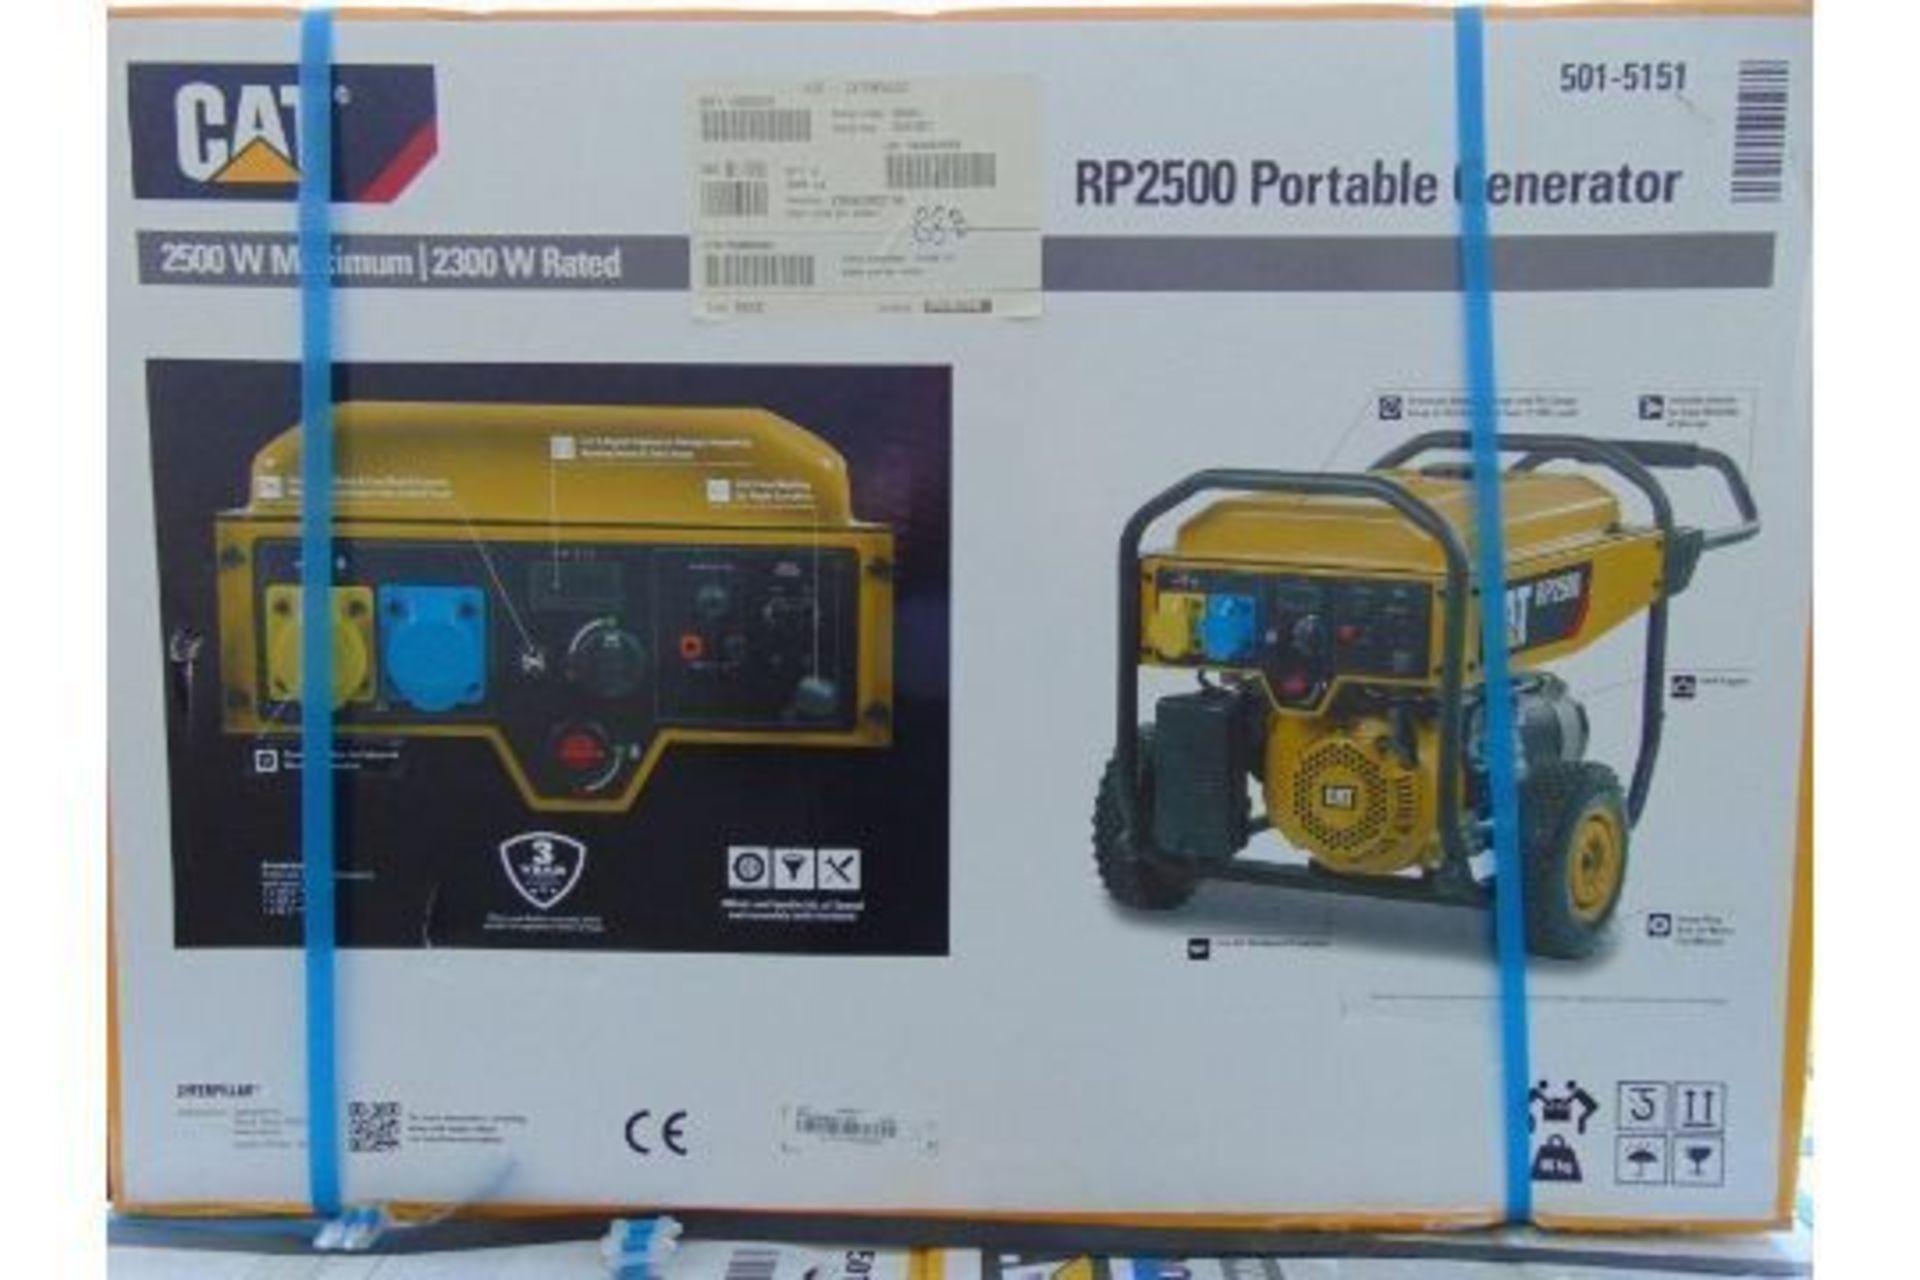 NEW and UNISSUED Caterpillar RP2500 (3.1 KVA) Industrial Petrol Generator Set - Image 3 of 5